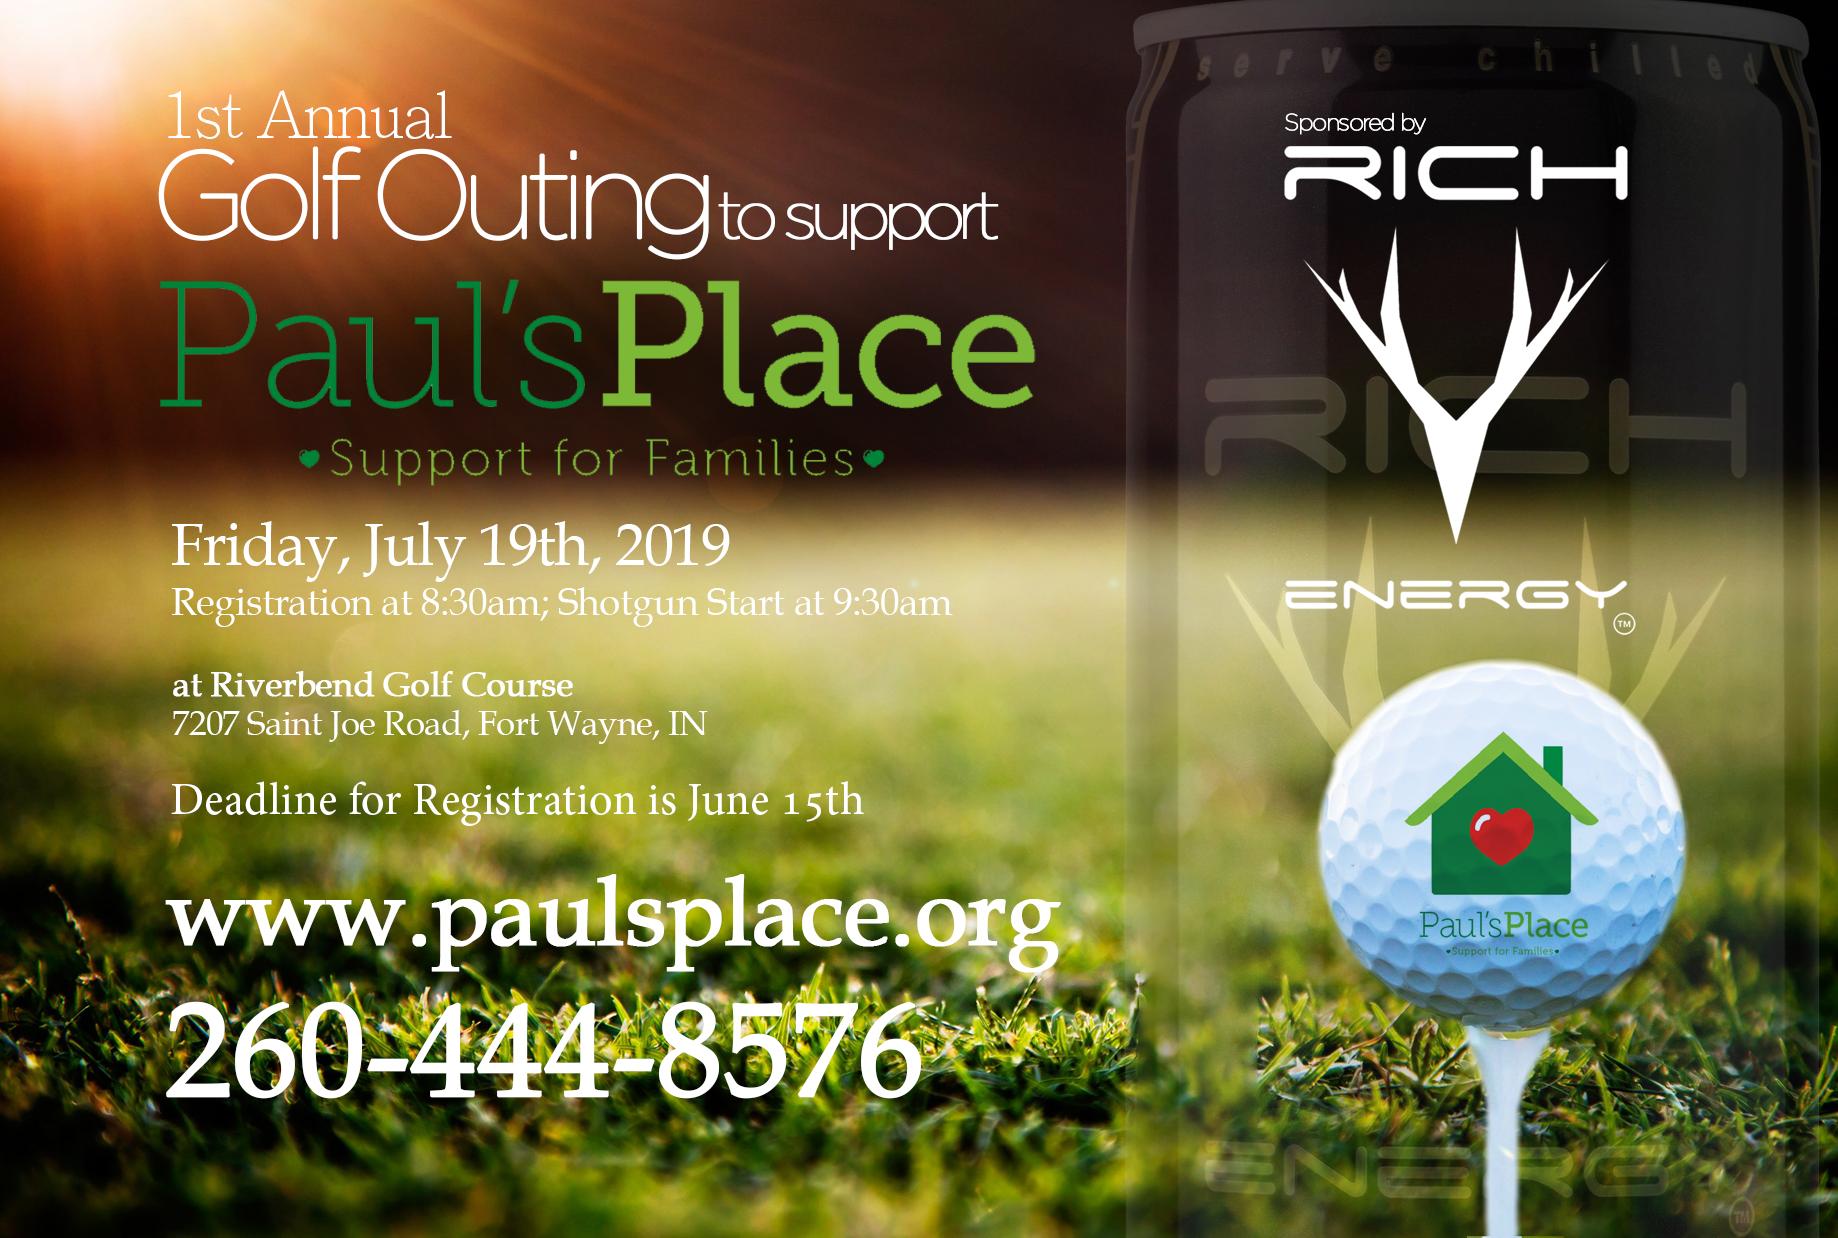 Paul's Place 1st Annual Golf Outing